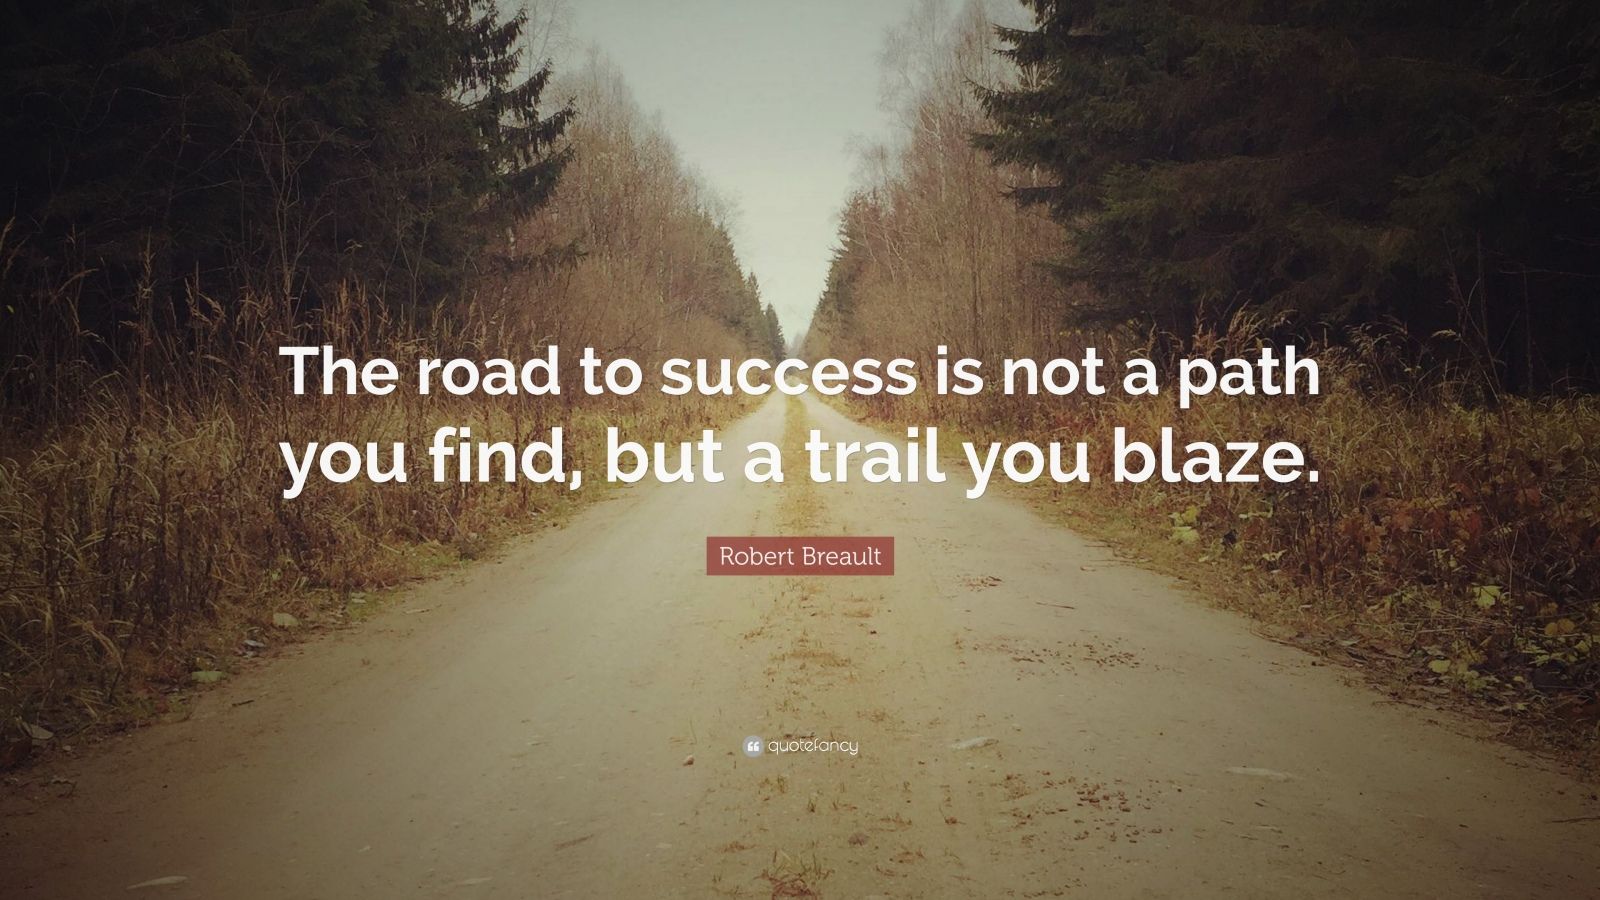 Robert Breault Quote: “The road to success is not a path you find, but ...